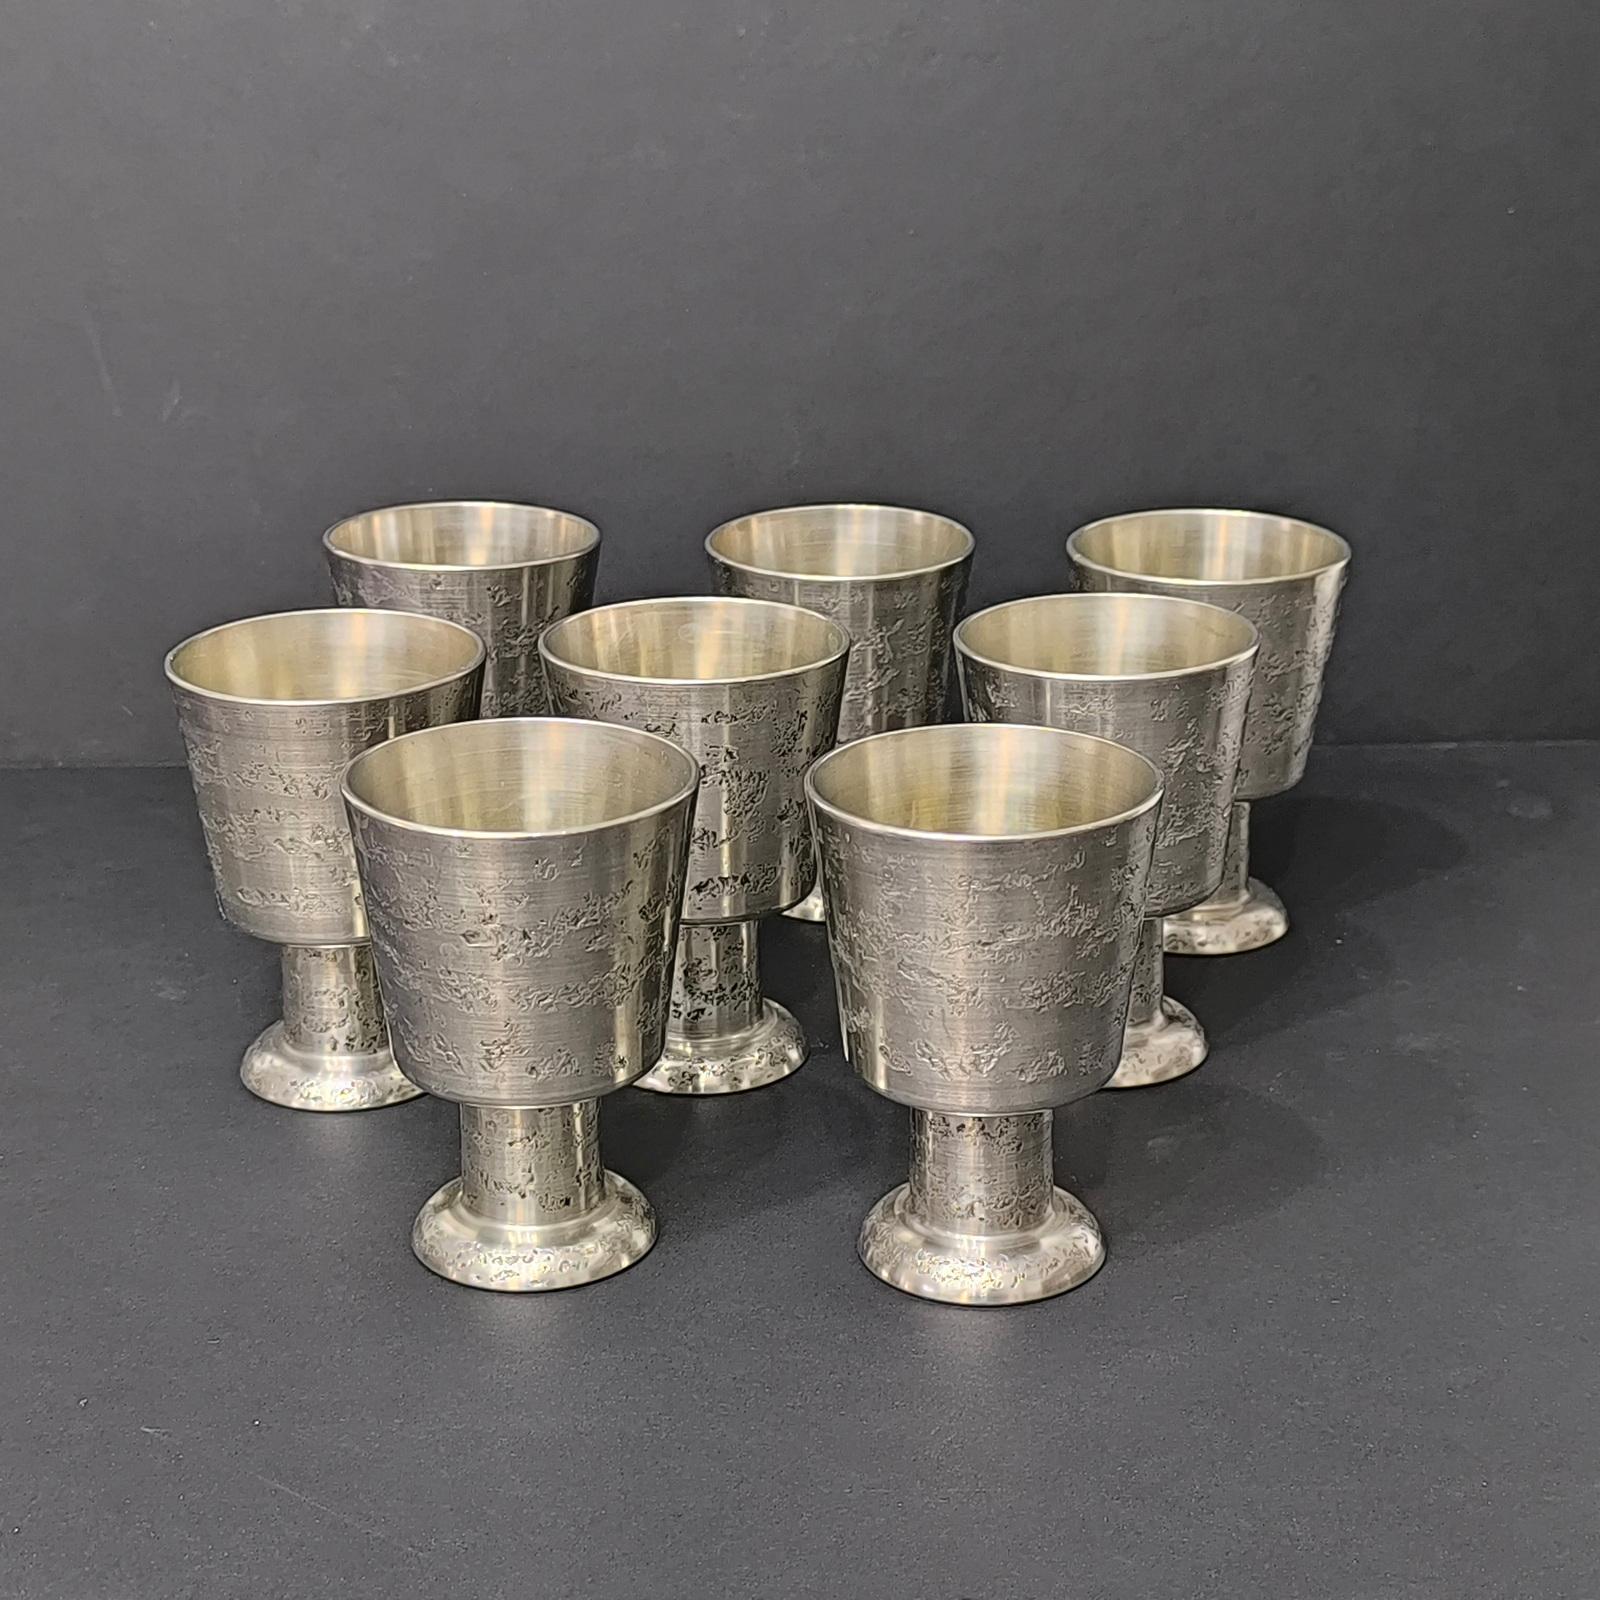 Vintage Pewter Cocktail Shaker Set of 32 Pieces, Viking Style, Norway 1970s For Sale 1